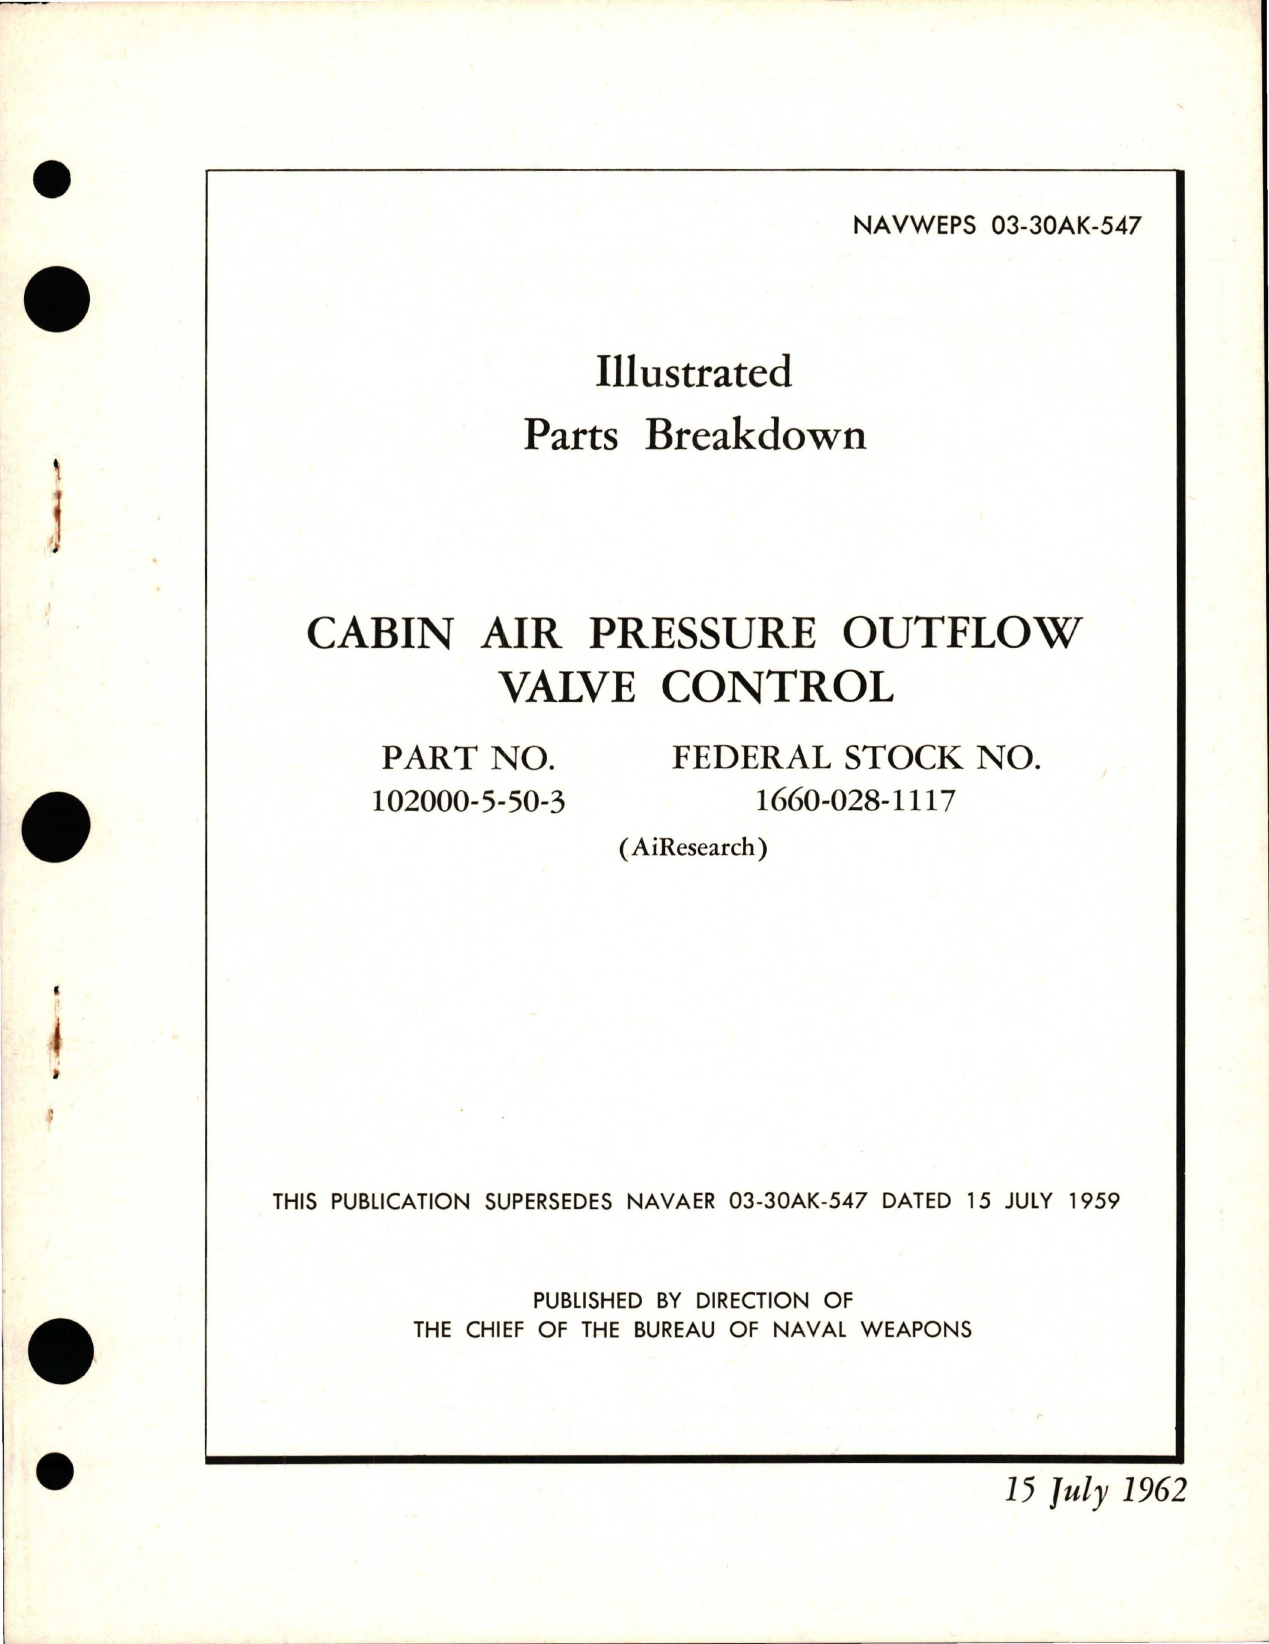 Sample page 1 from AirCorps Library document: Illustrated Parts Breakdown for Cabin Air Pressure Outflow Valve Control - Part 102000-5-50-3